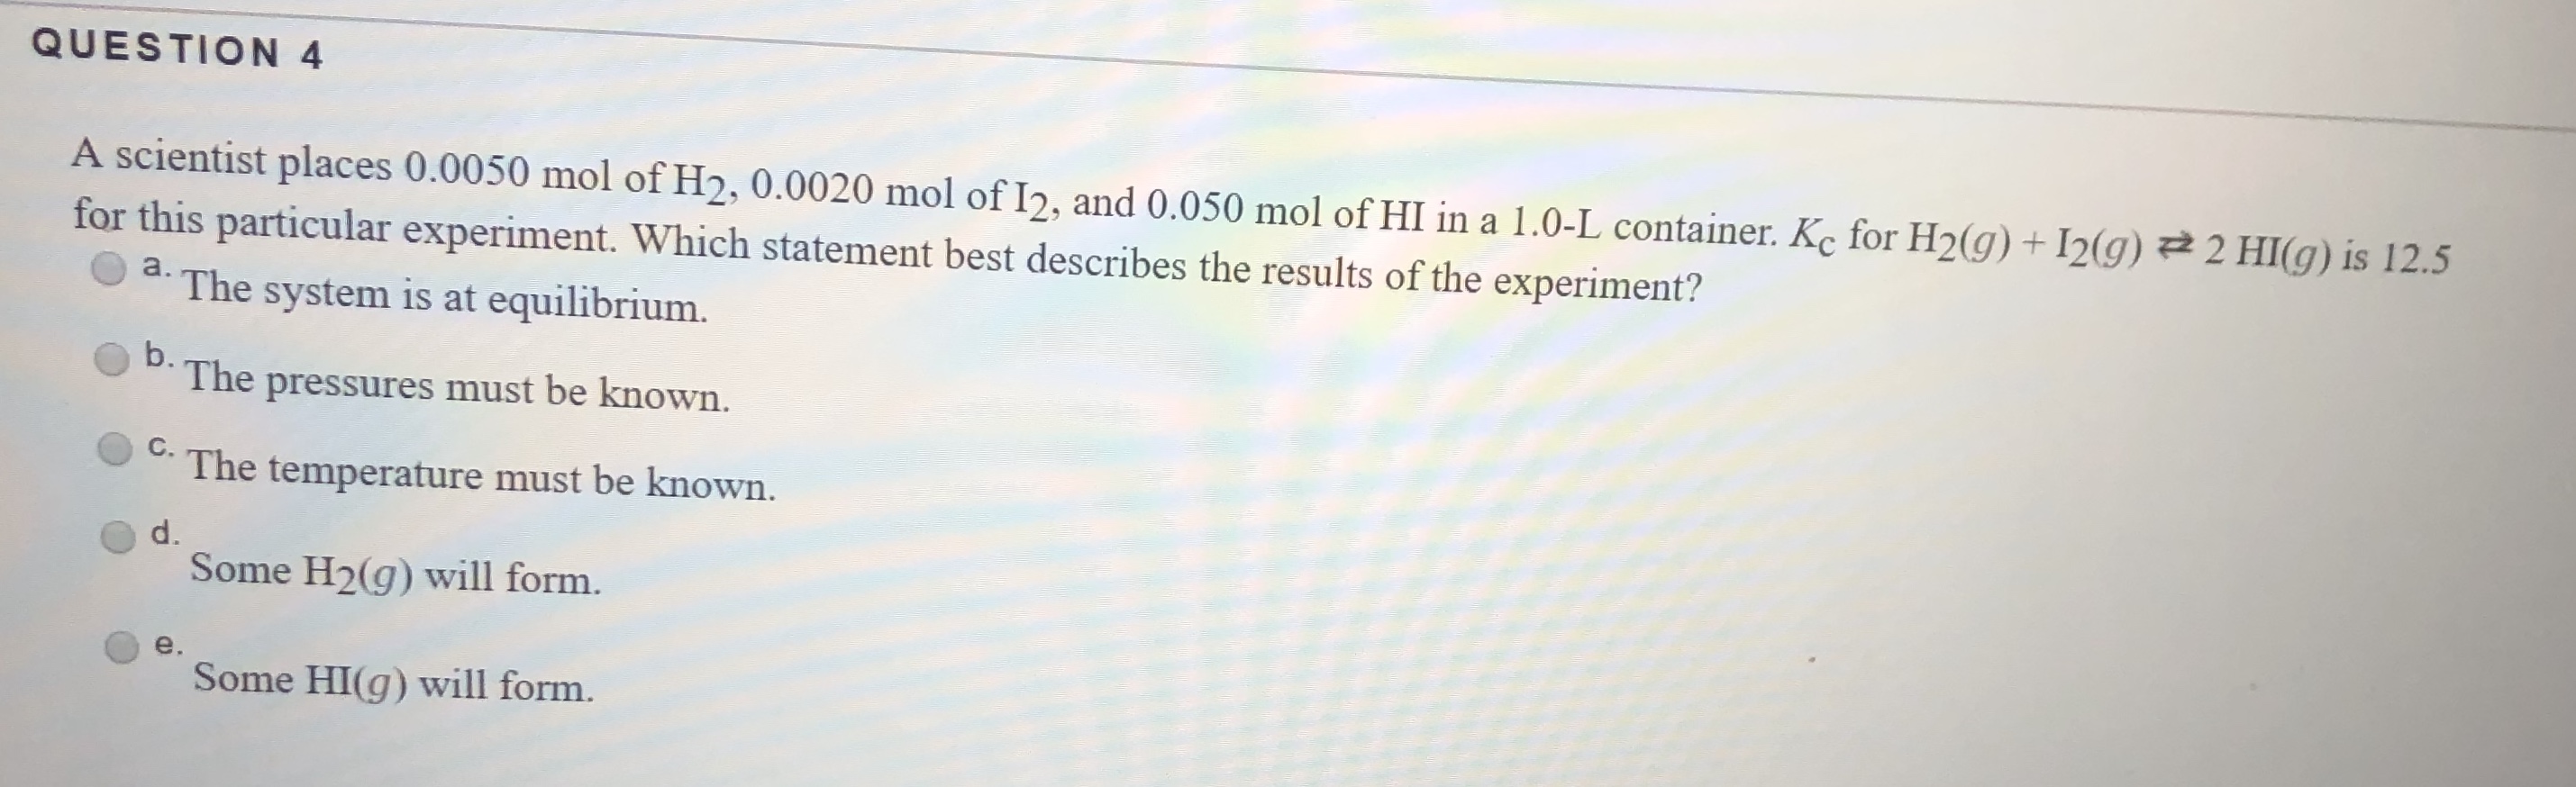 QUESTION 4
A scientist places 0.0050 mol of H2, 0.0020 mol of I2, and 0.050 mol of HI in a 1.0-L container. Kc for H2(g) +I2(g)
for this particular experiment. Which statement best describes the results of the experiment?
2 HI(g) is 12.5
а.
The system is at equilibrium.
b.
The pressures must be known.
C.
The temperature must be known.
d.
Some H2(g) will form.
Some HI(g) will form.
